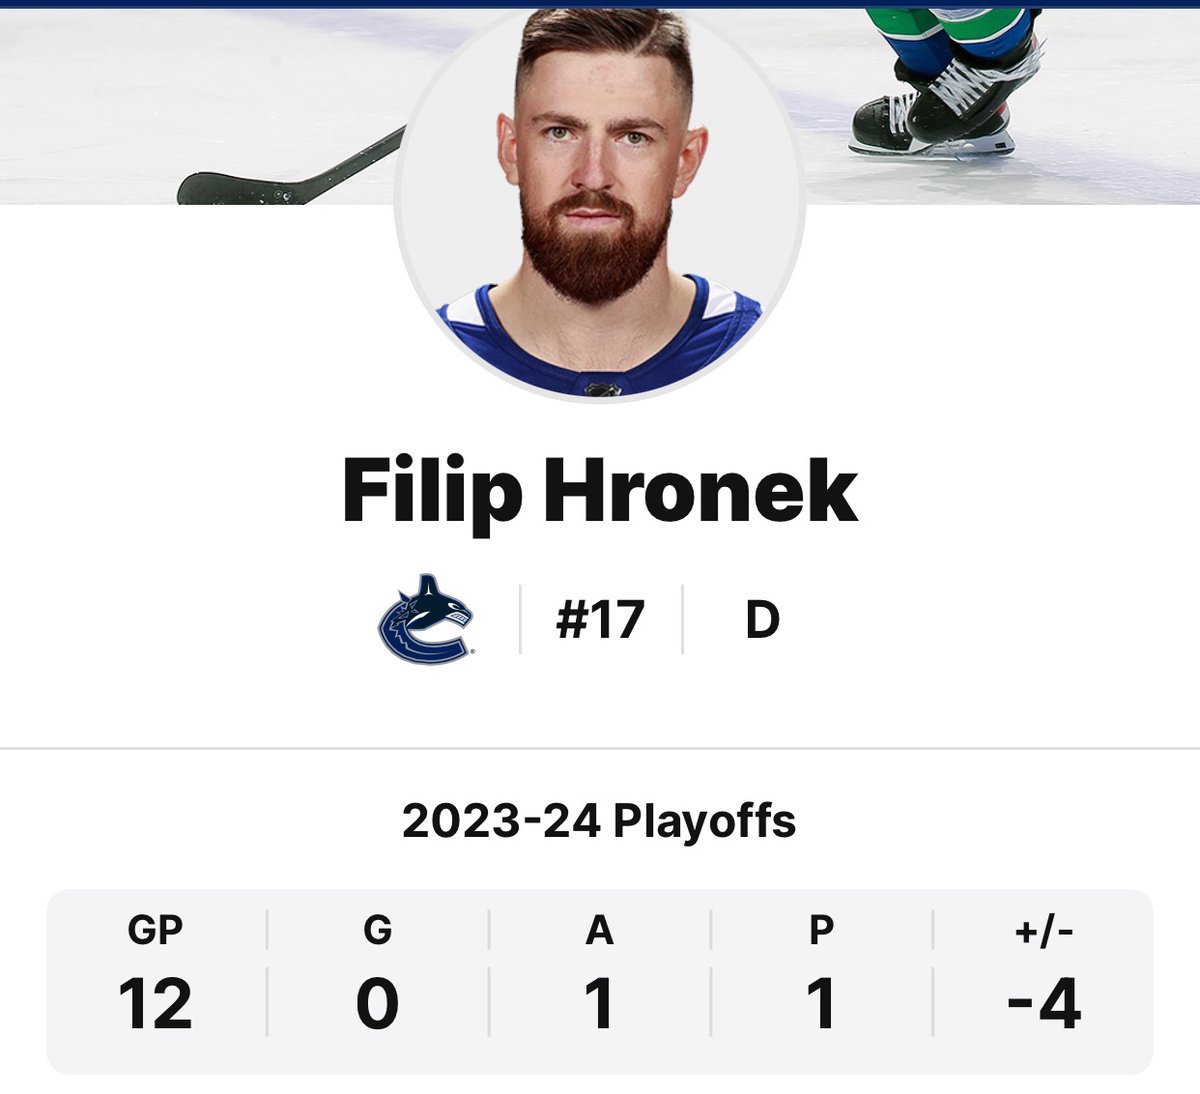 Hey Filip, your dreams of a big contract have been fading fast since these playoffs began. Please defend well and get some of those booming shots you were once famous for on net tonight… if you hope to be here next season. #Canucks